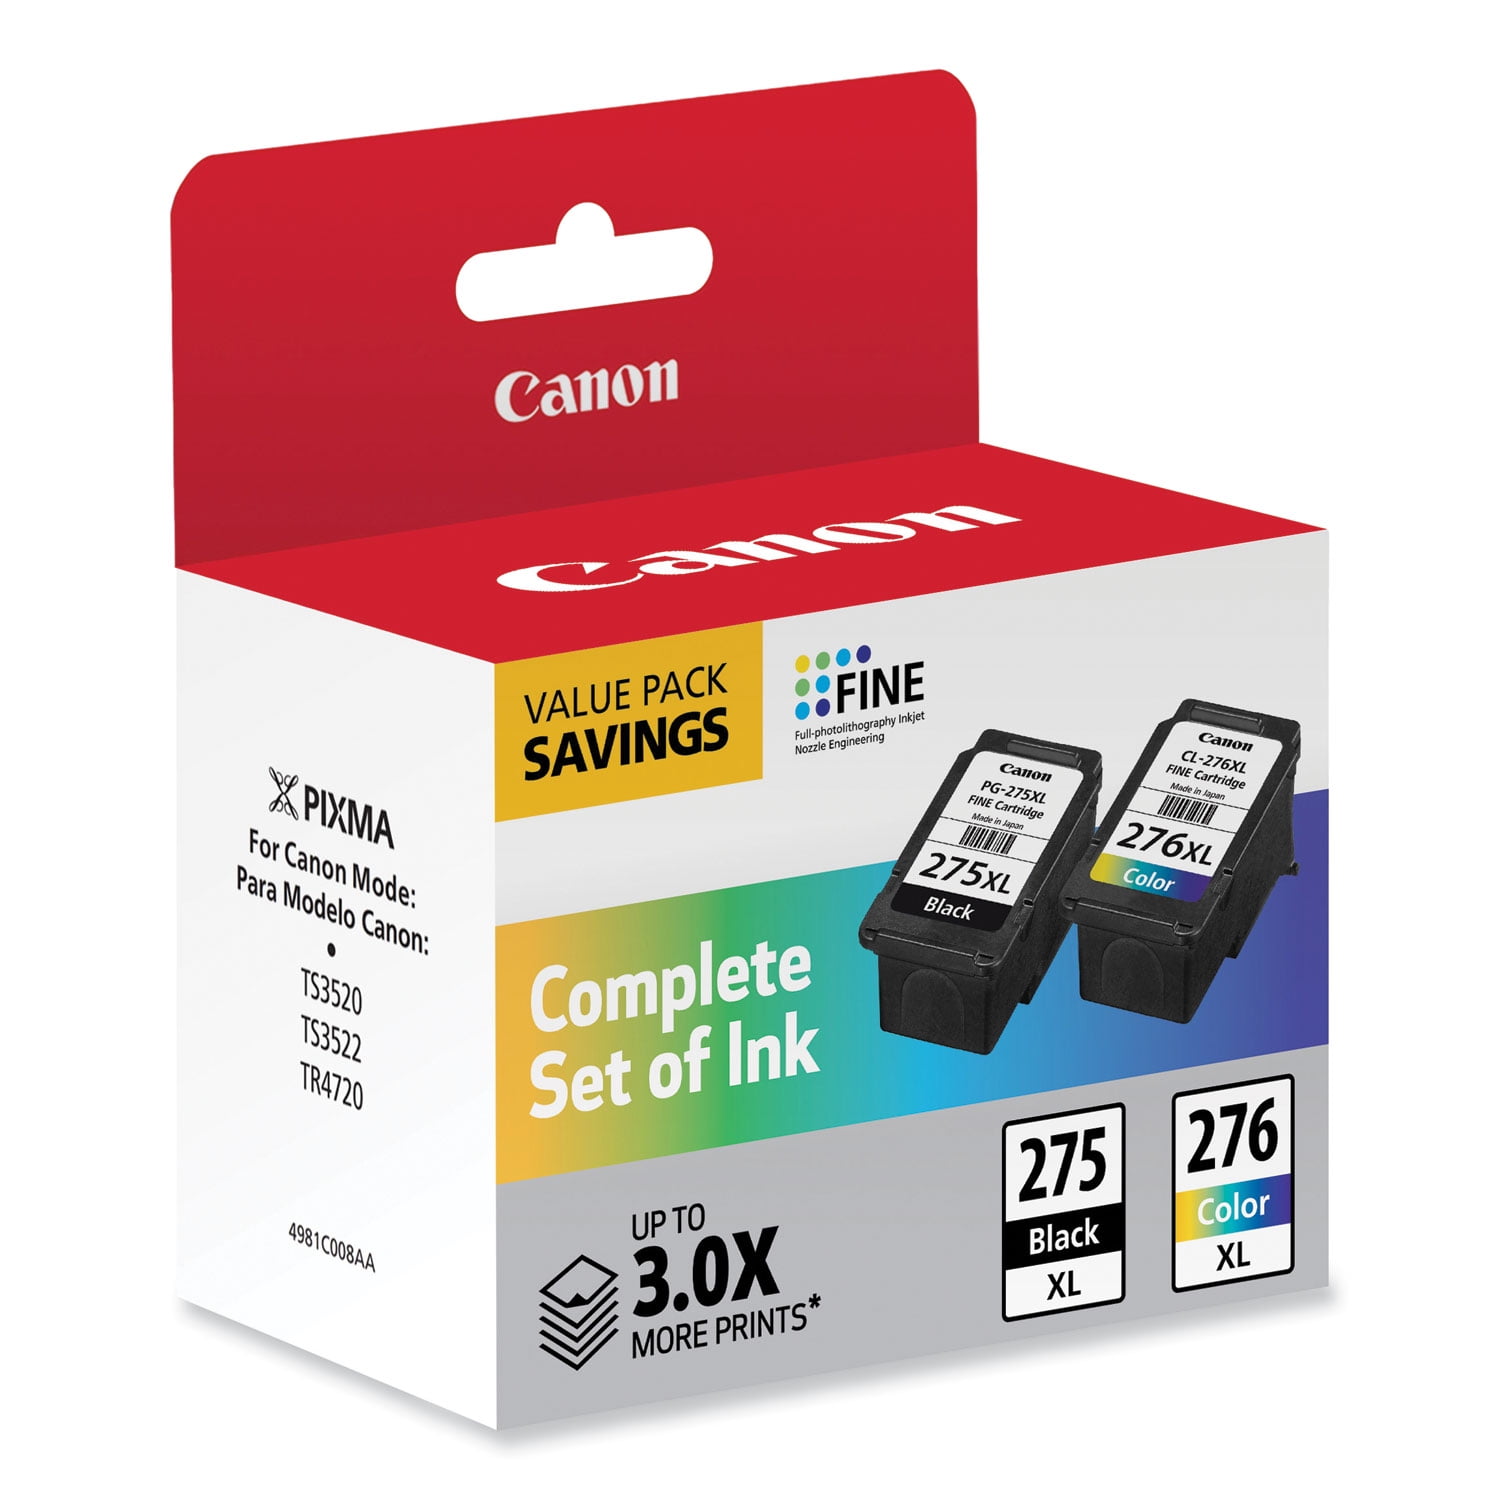 Canon 4981C008 (PG-275XL/CL-276XL) High-Yield Multipack Ink, Black/Tri-Color